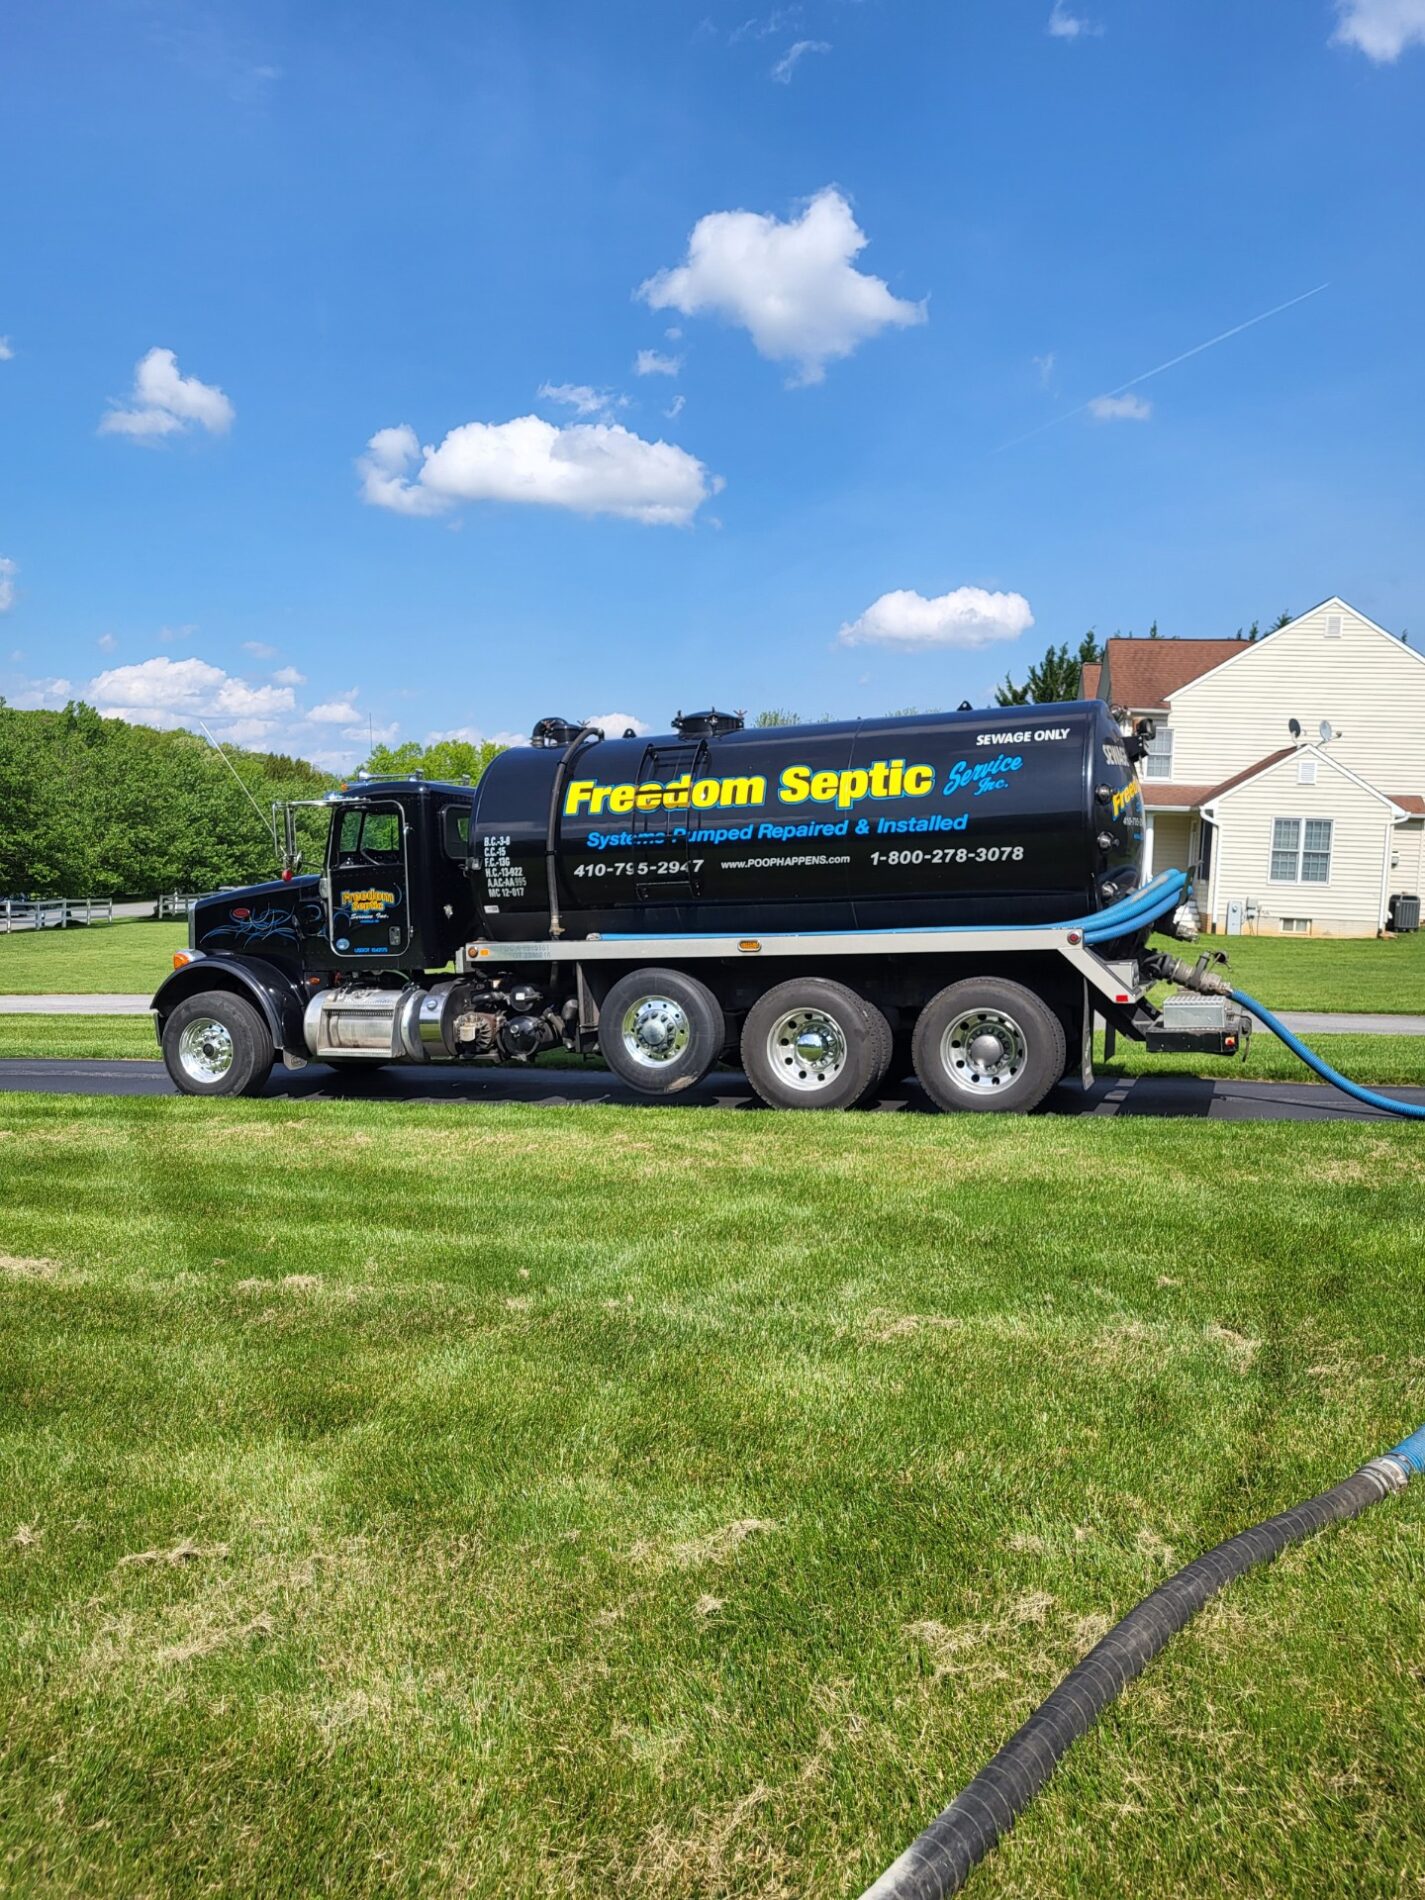 A black Freedom Septic truck parked on a grass lawn in front of a house, with a hose connected to it. The sky is clear with a few clouds.